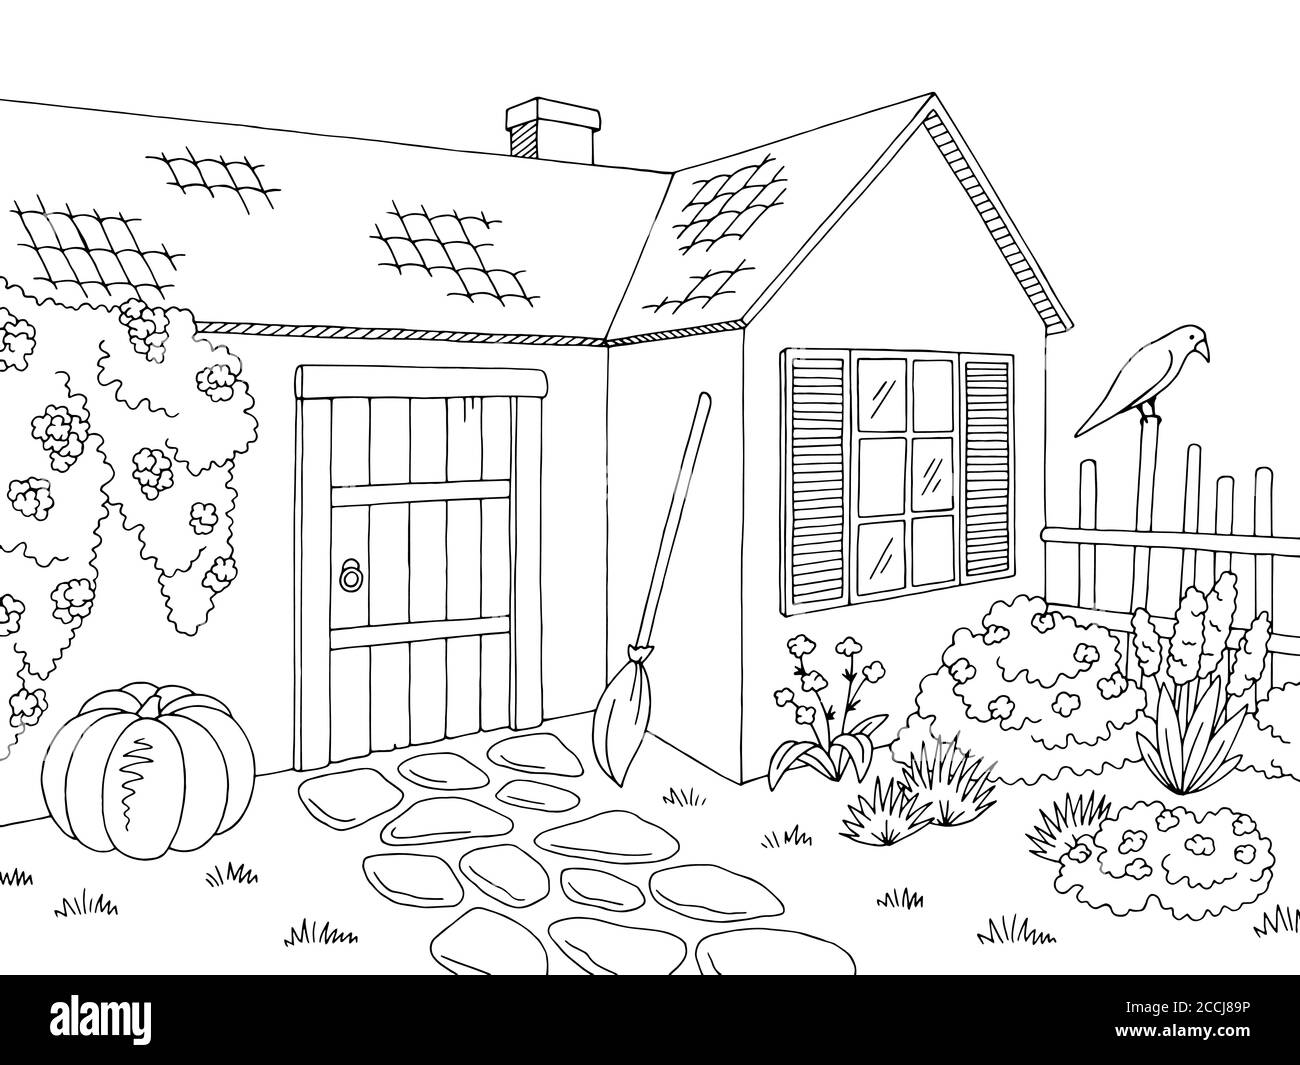 Witch house exterior graphic black white sketch illustration vector Stock Vector